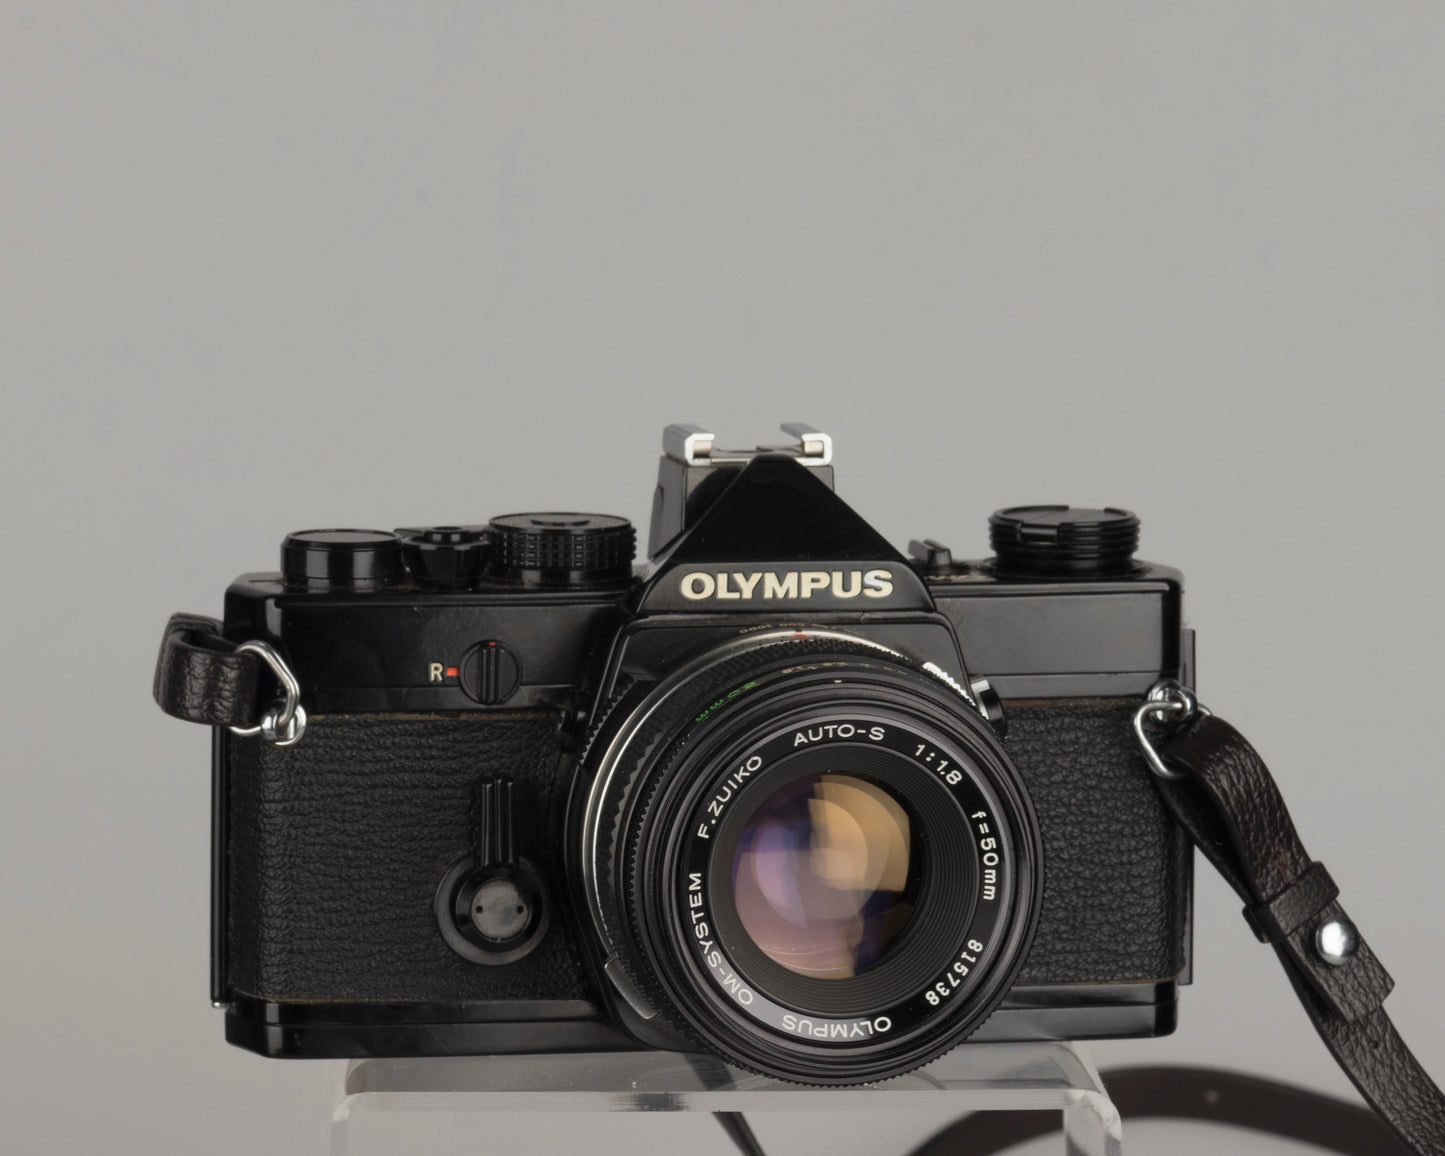 The classic Olympus OM-1; this is the original (non-MD) version in black with the F. Zuiko Auto-S 50mm f1.8 lens